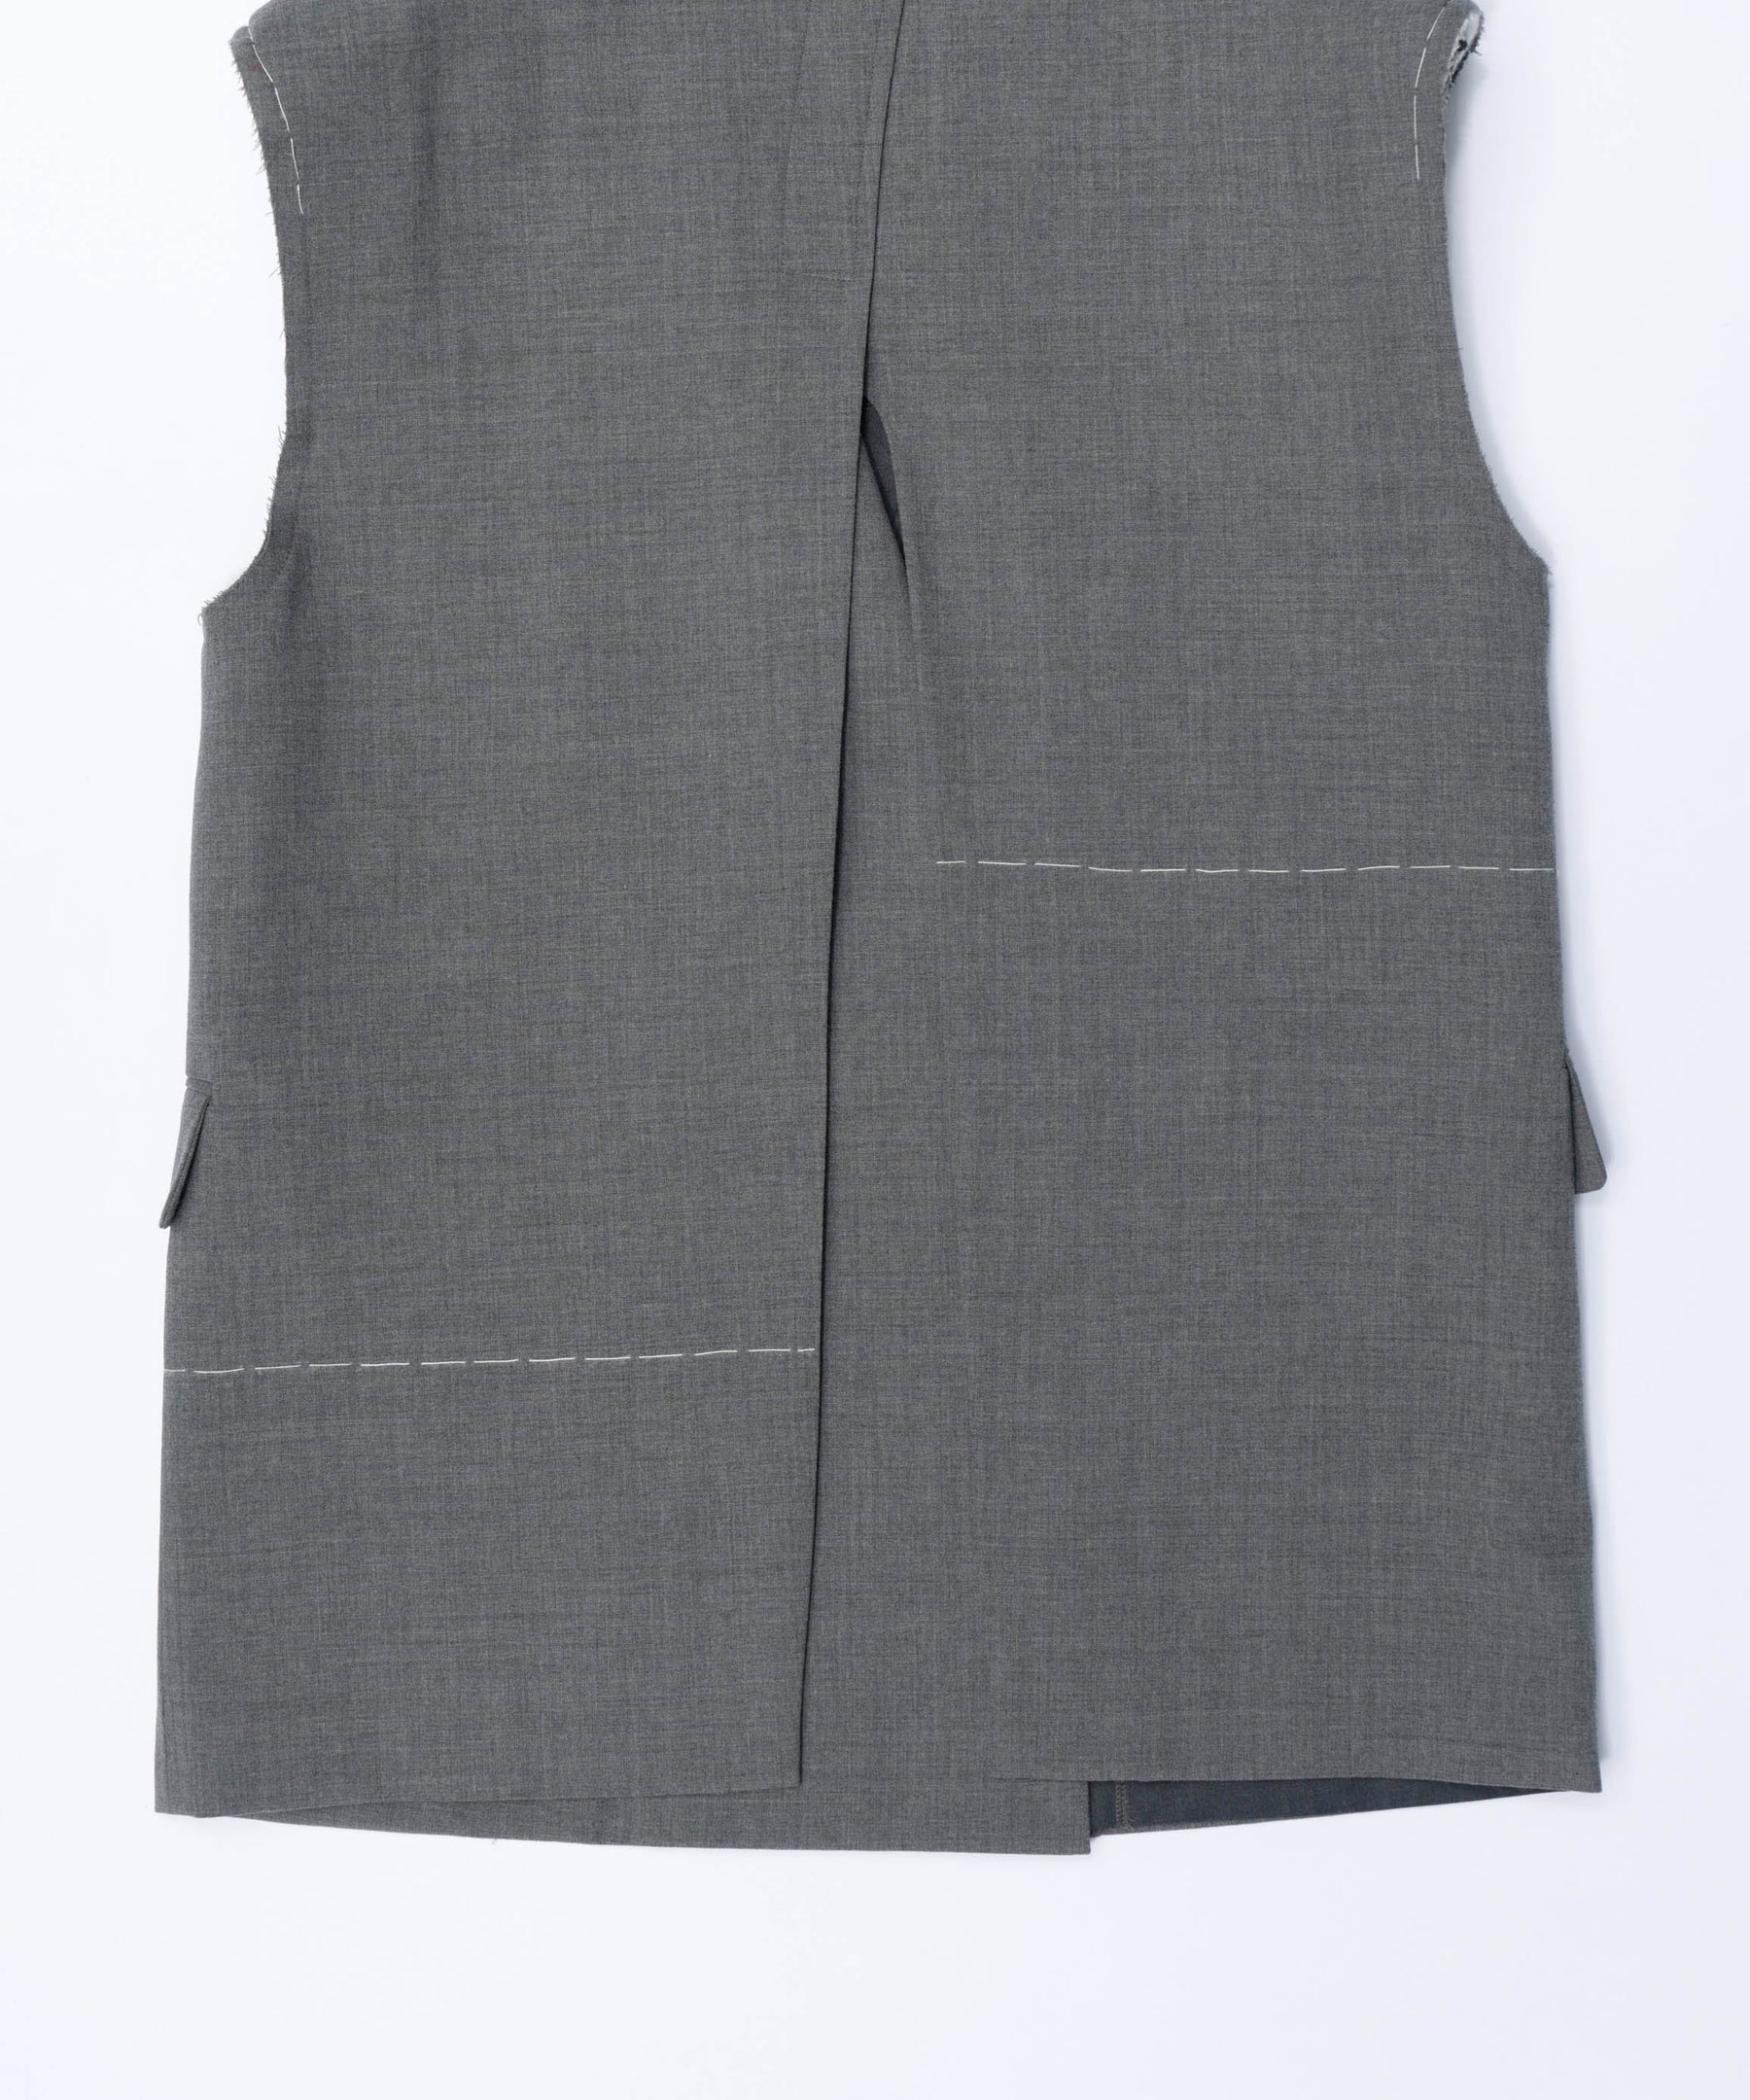 Double Color Hand Stitched Gilet